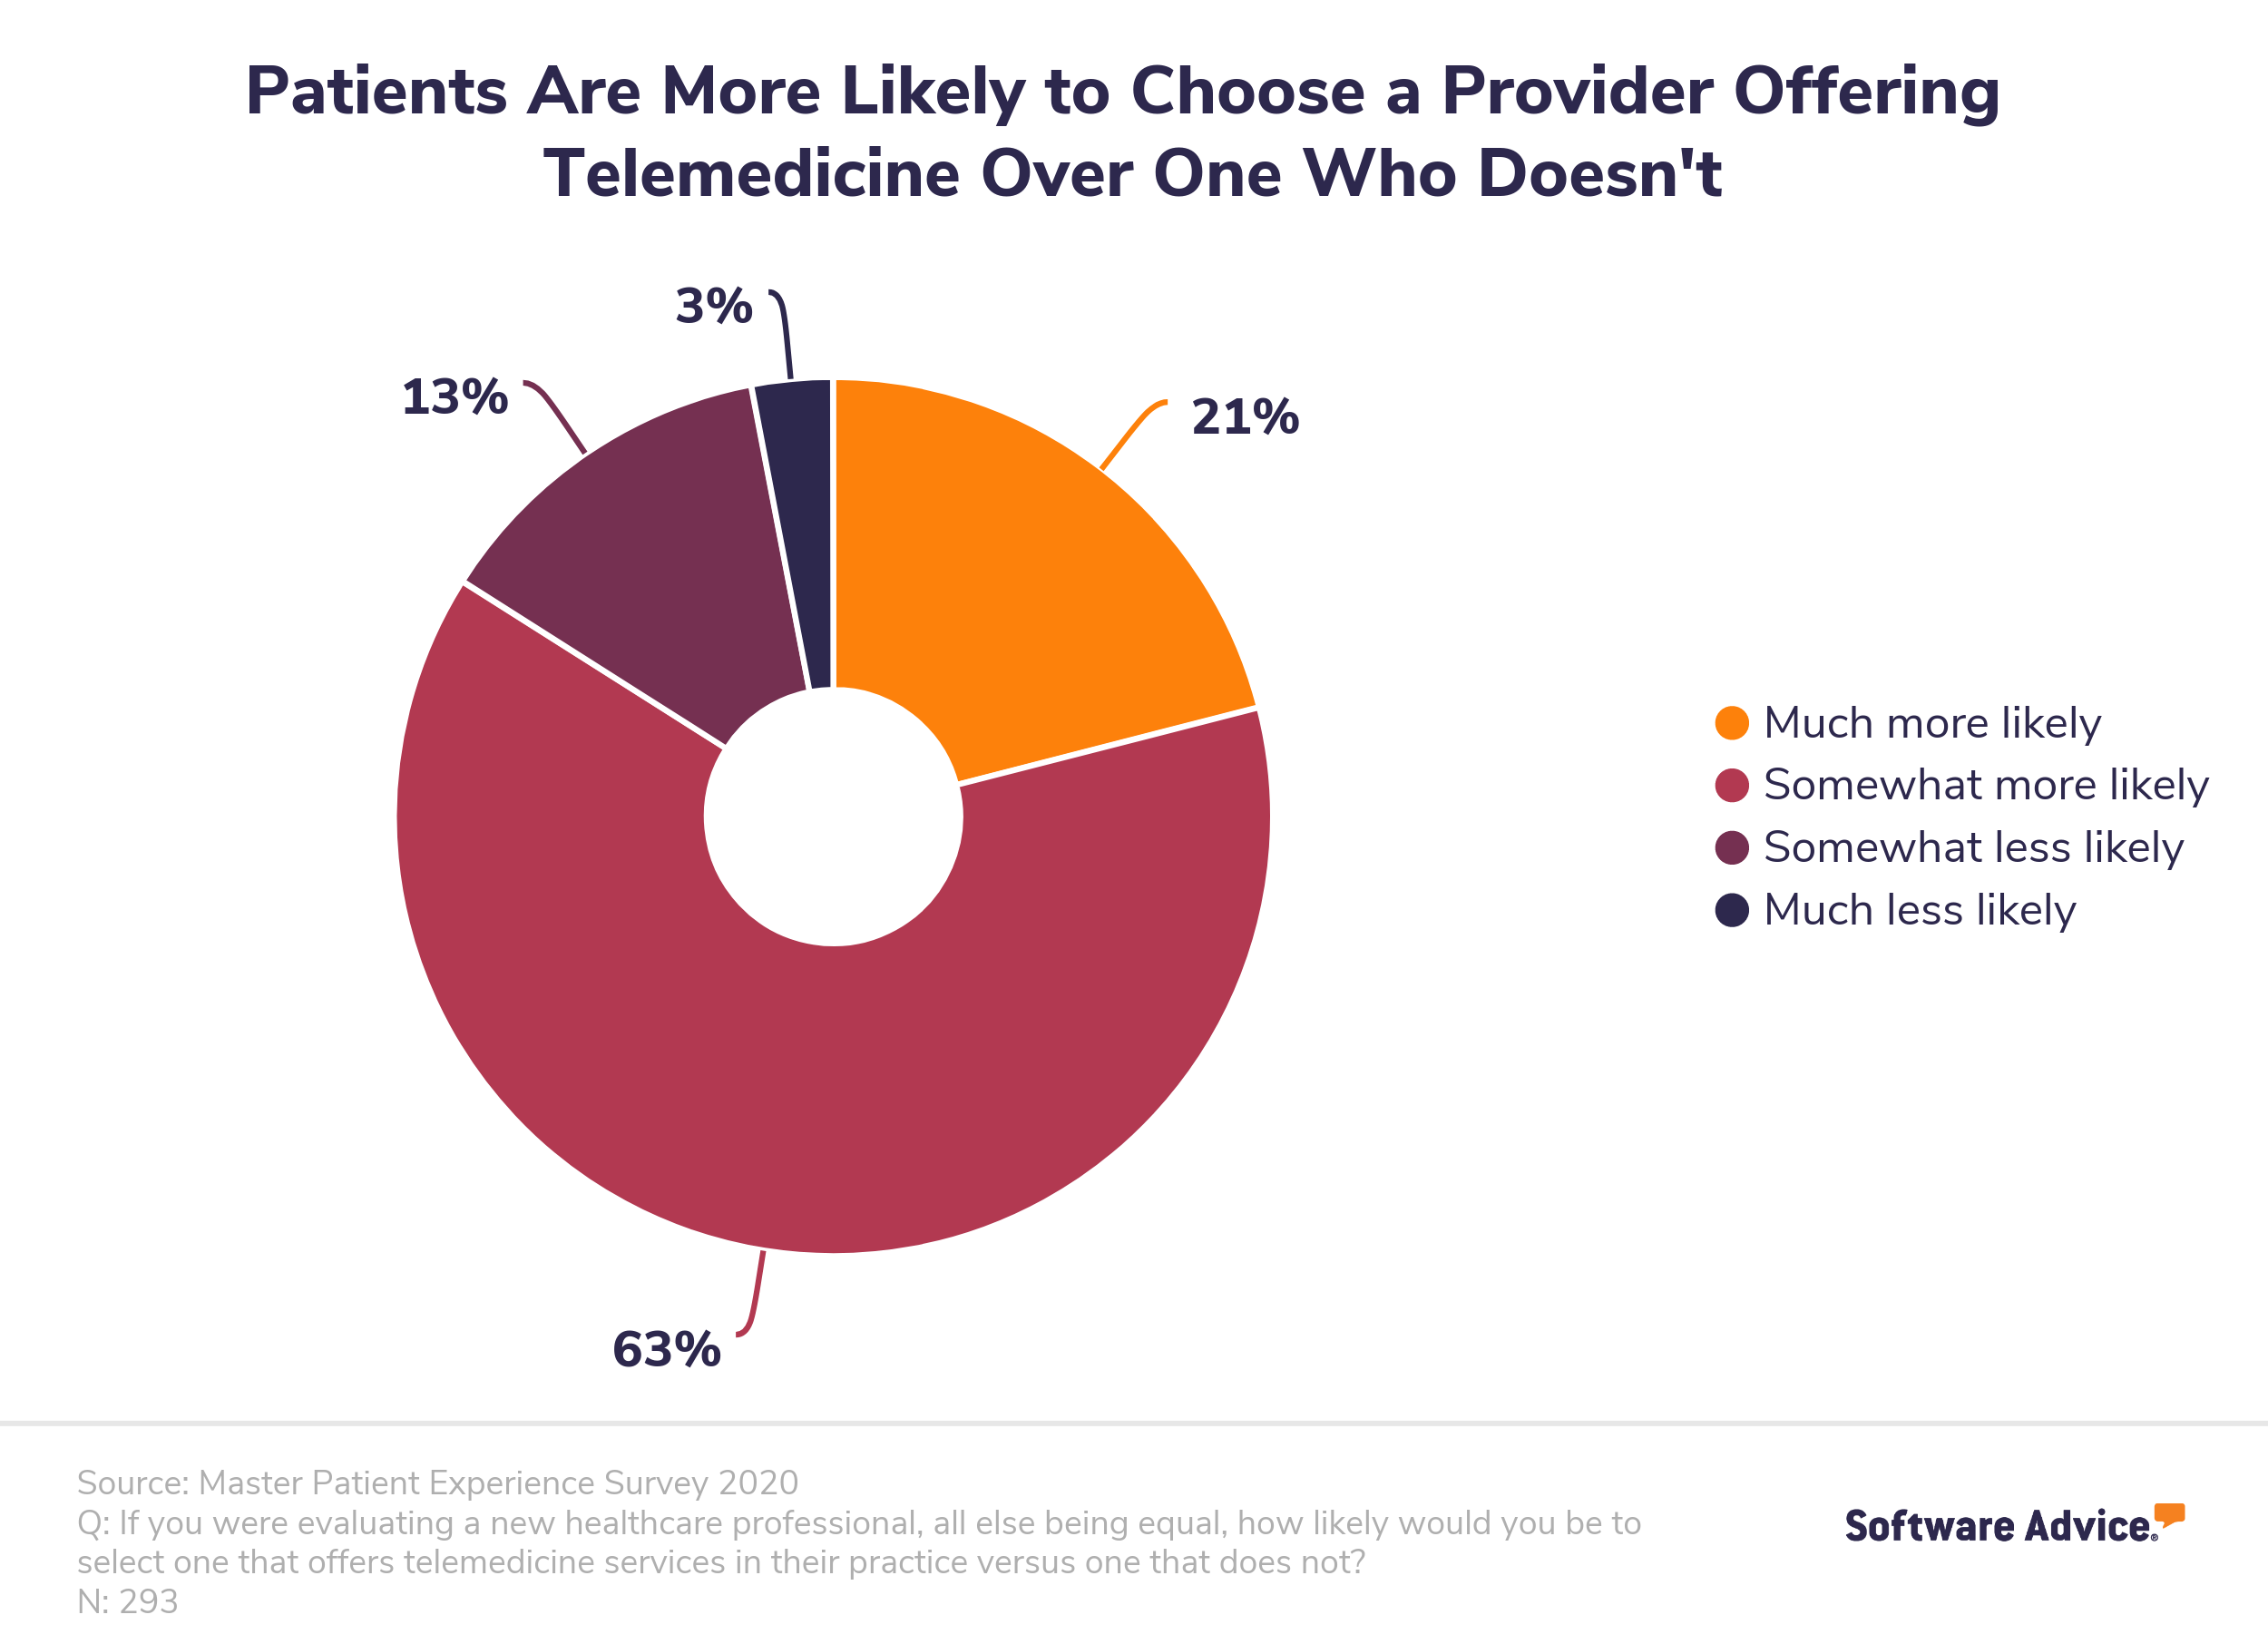 Patients-are-more-likely-to-choose-a-provider-offering-telemedicine-over-one-who-doesn't